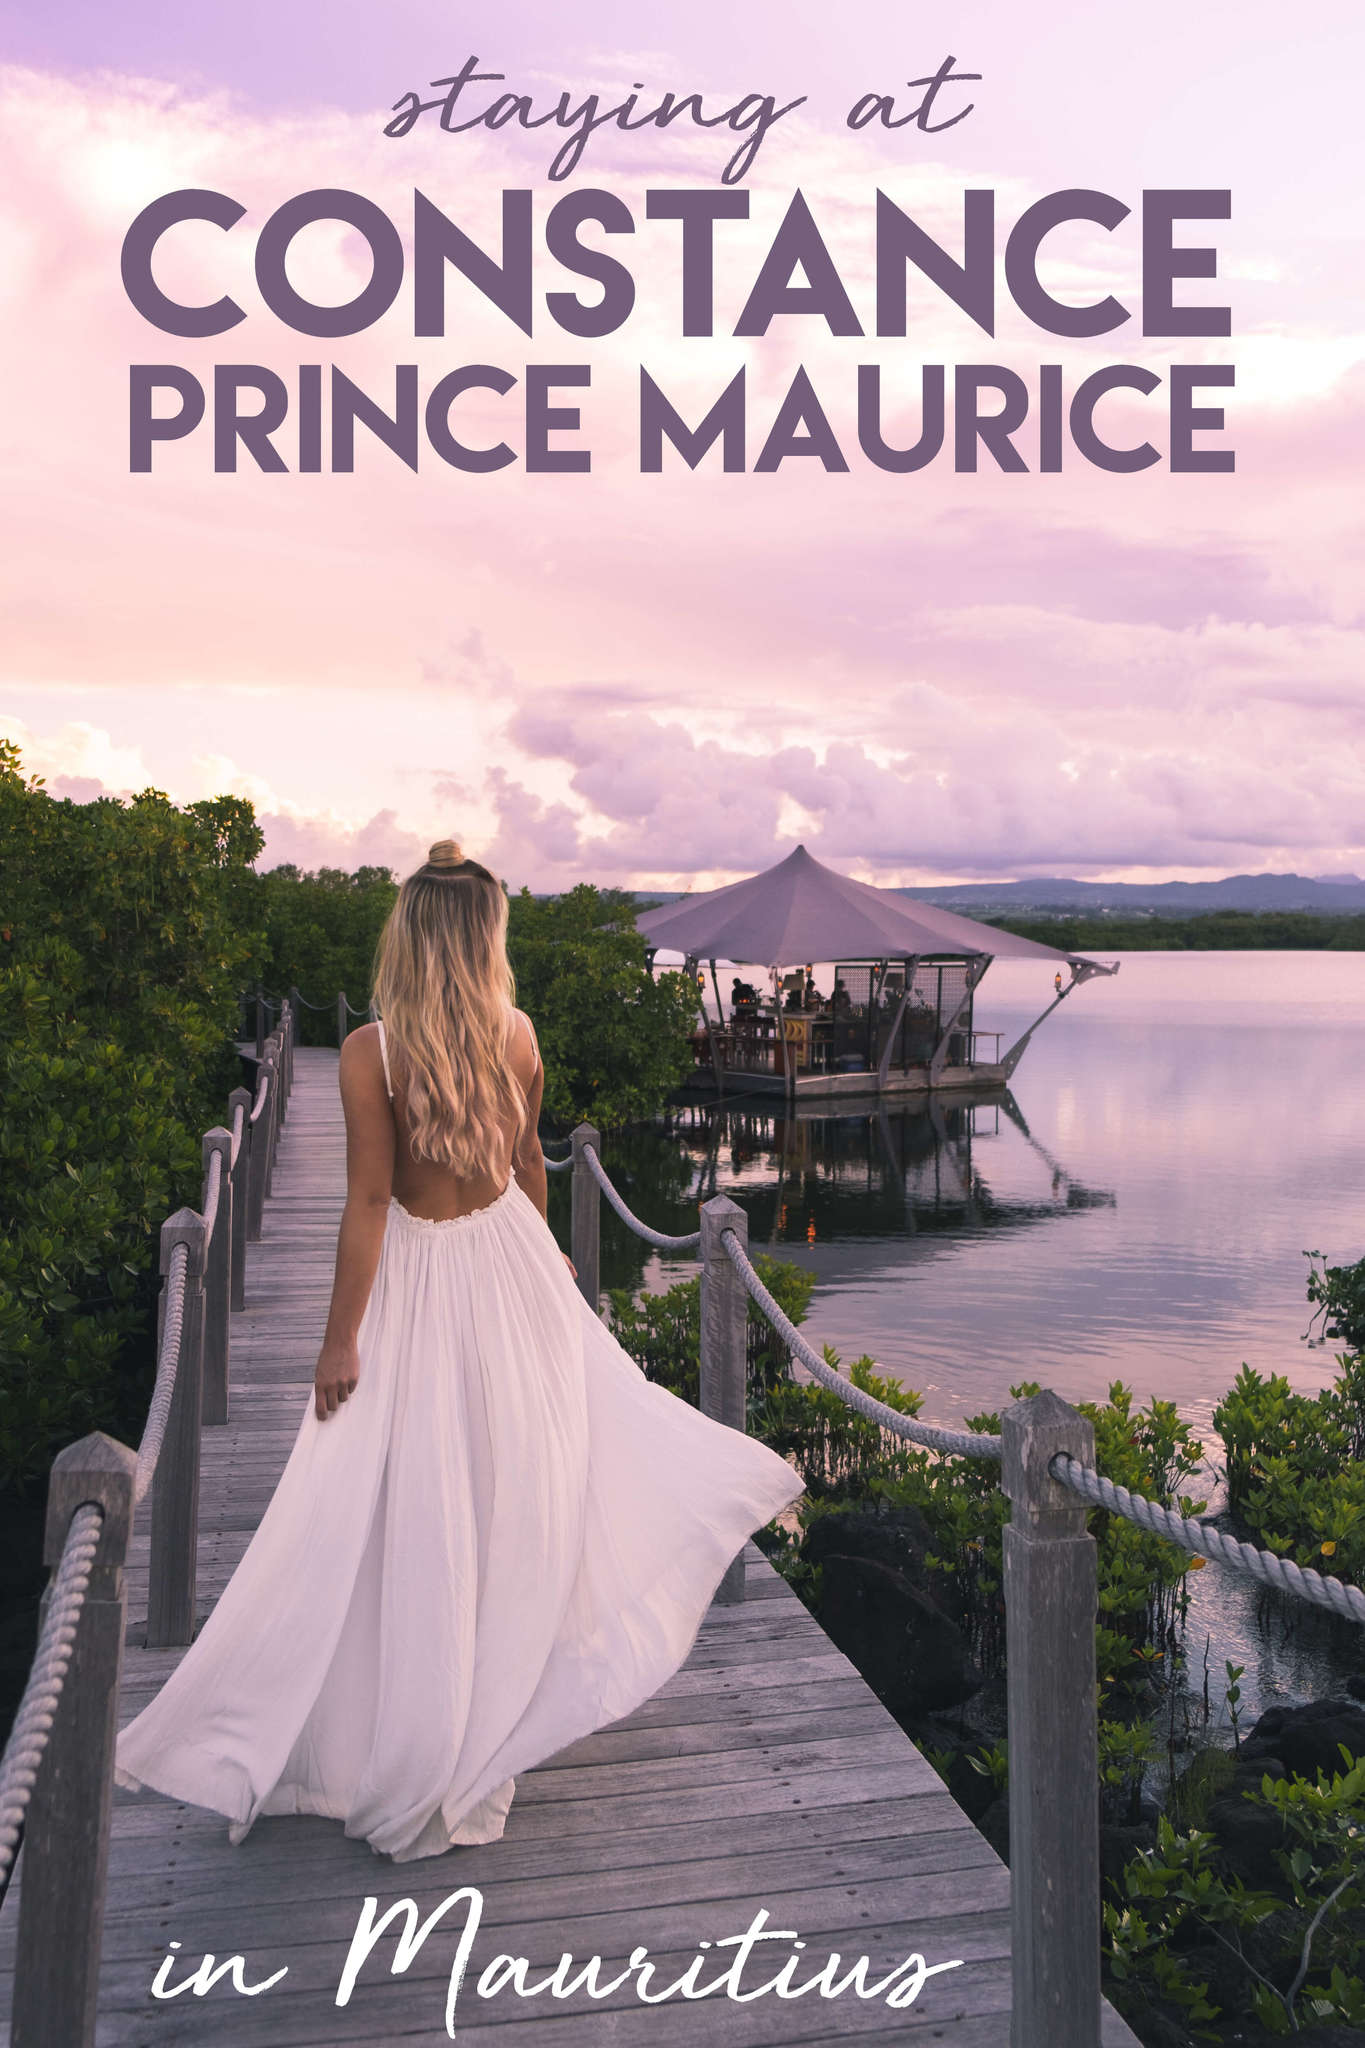 Staying at Constance Prince Maurice in Mauritius